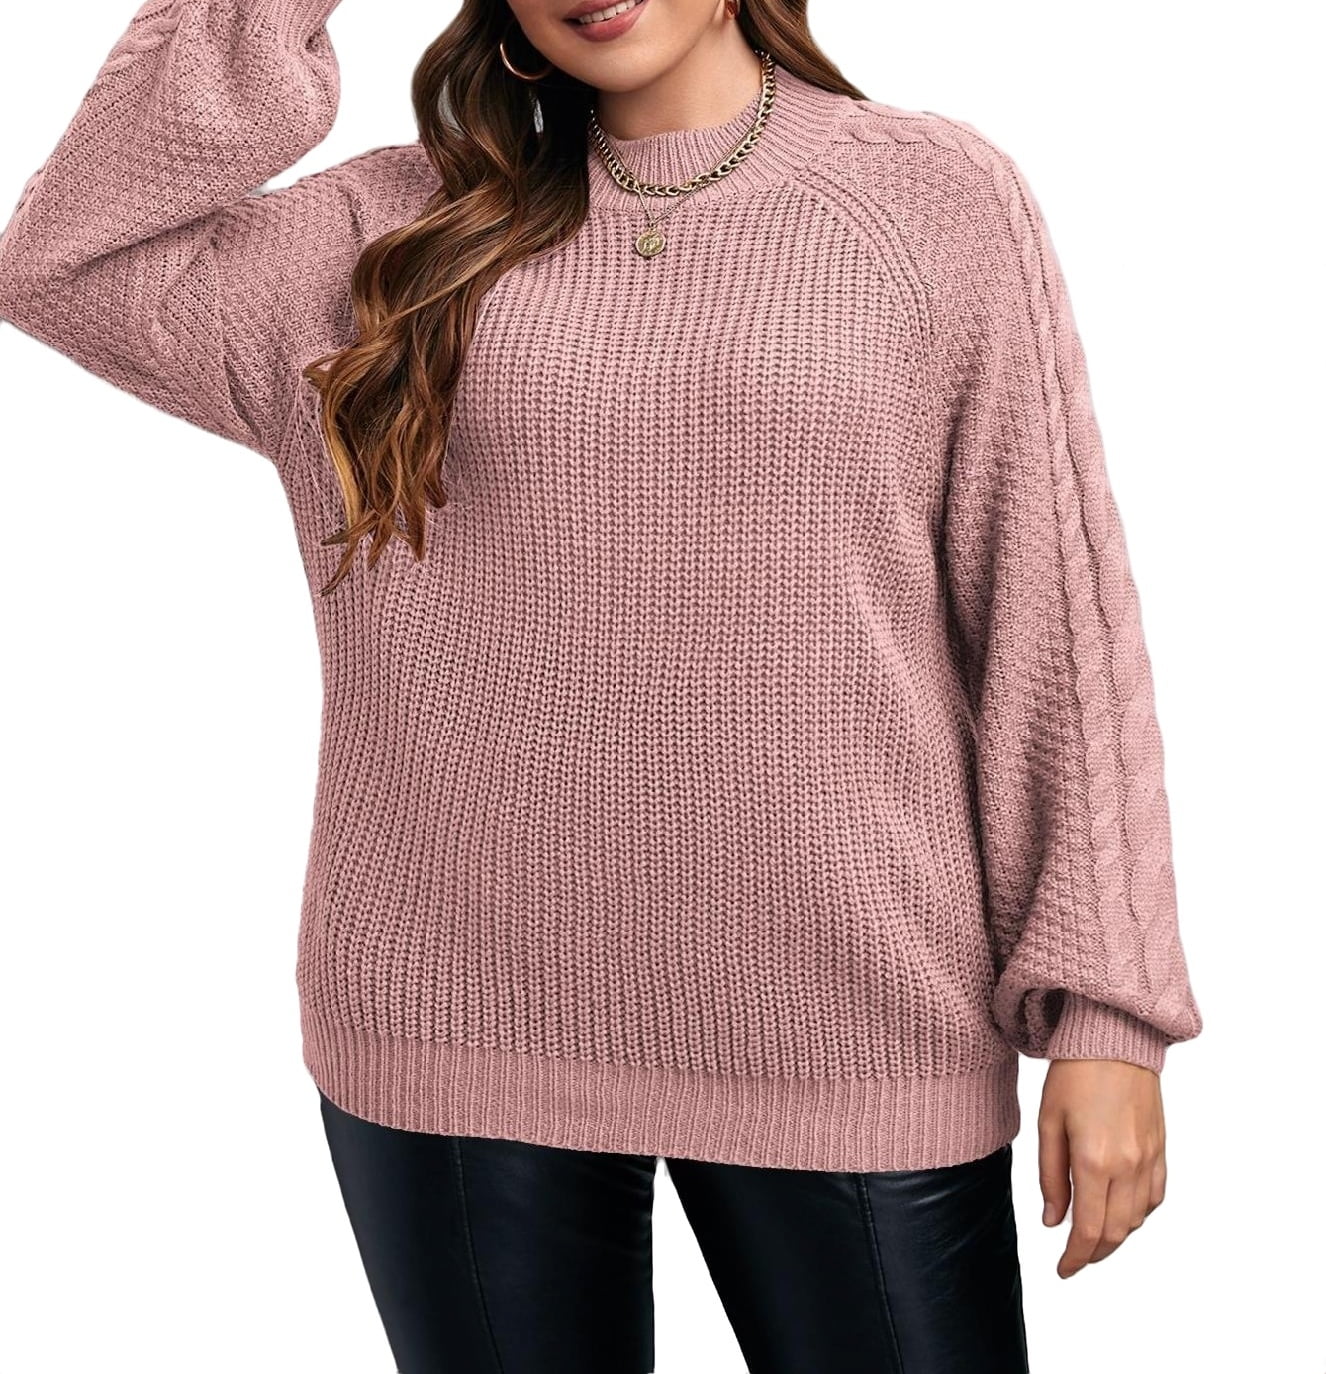 Casual Plain Round Neck Pullovers Long Sleeve Dusty Pink Plus Size ...